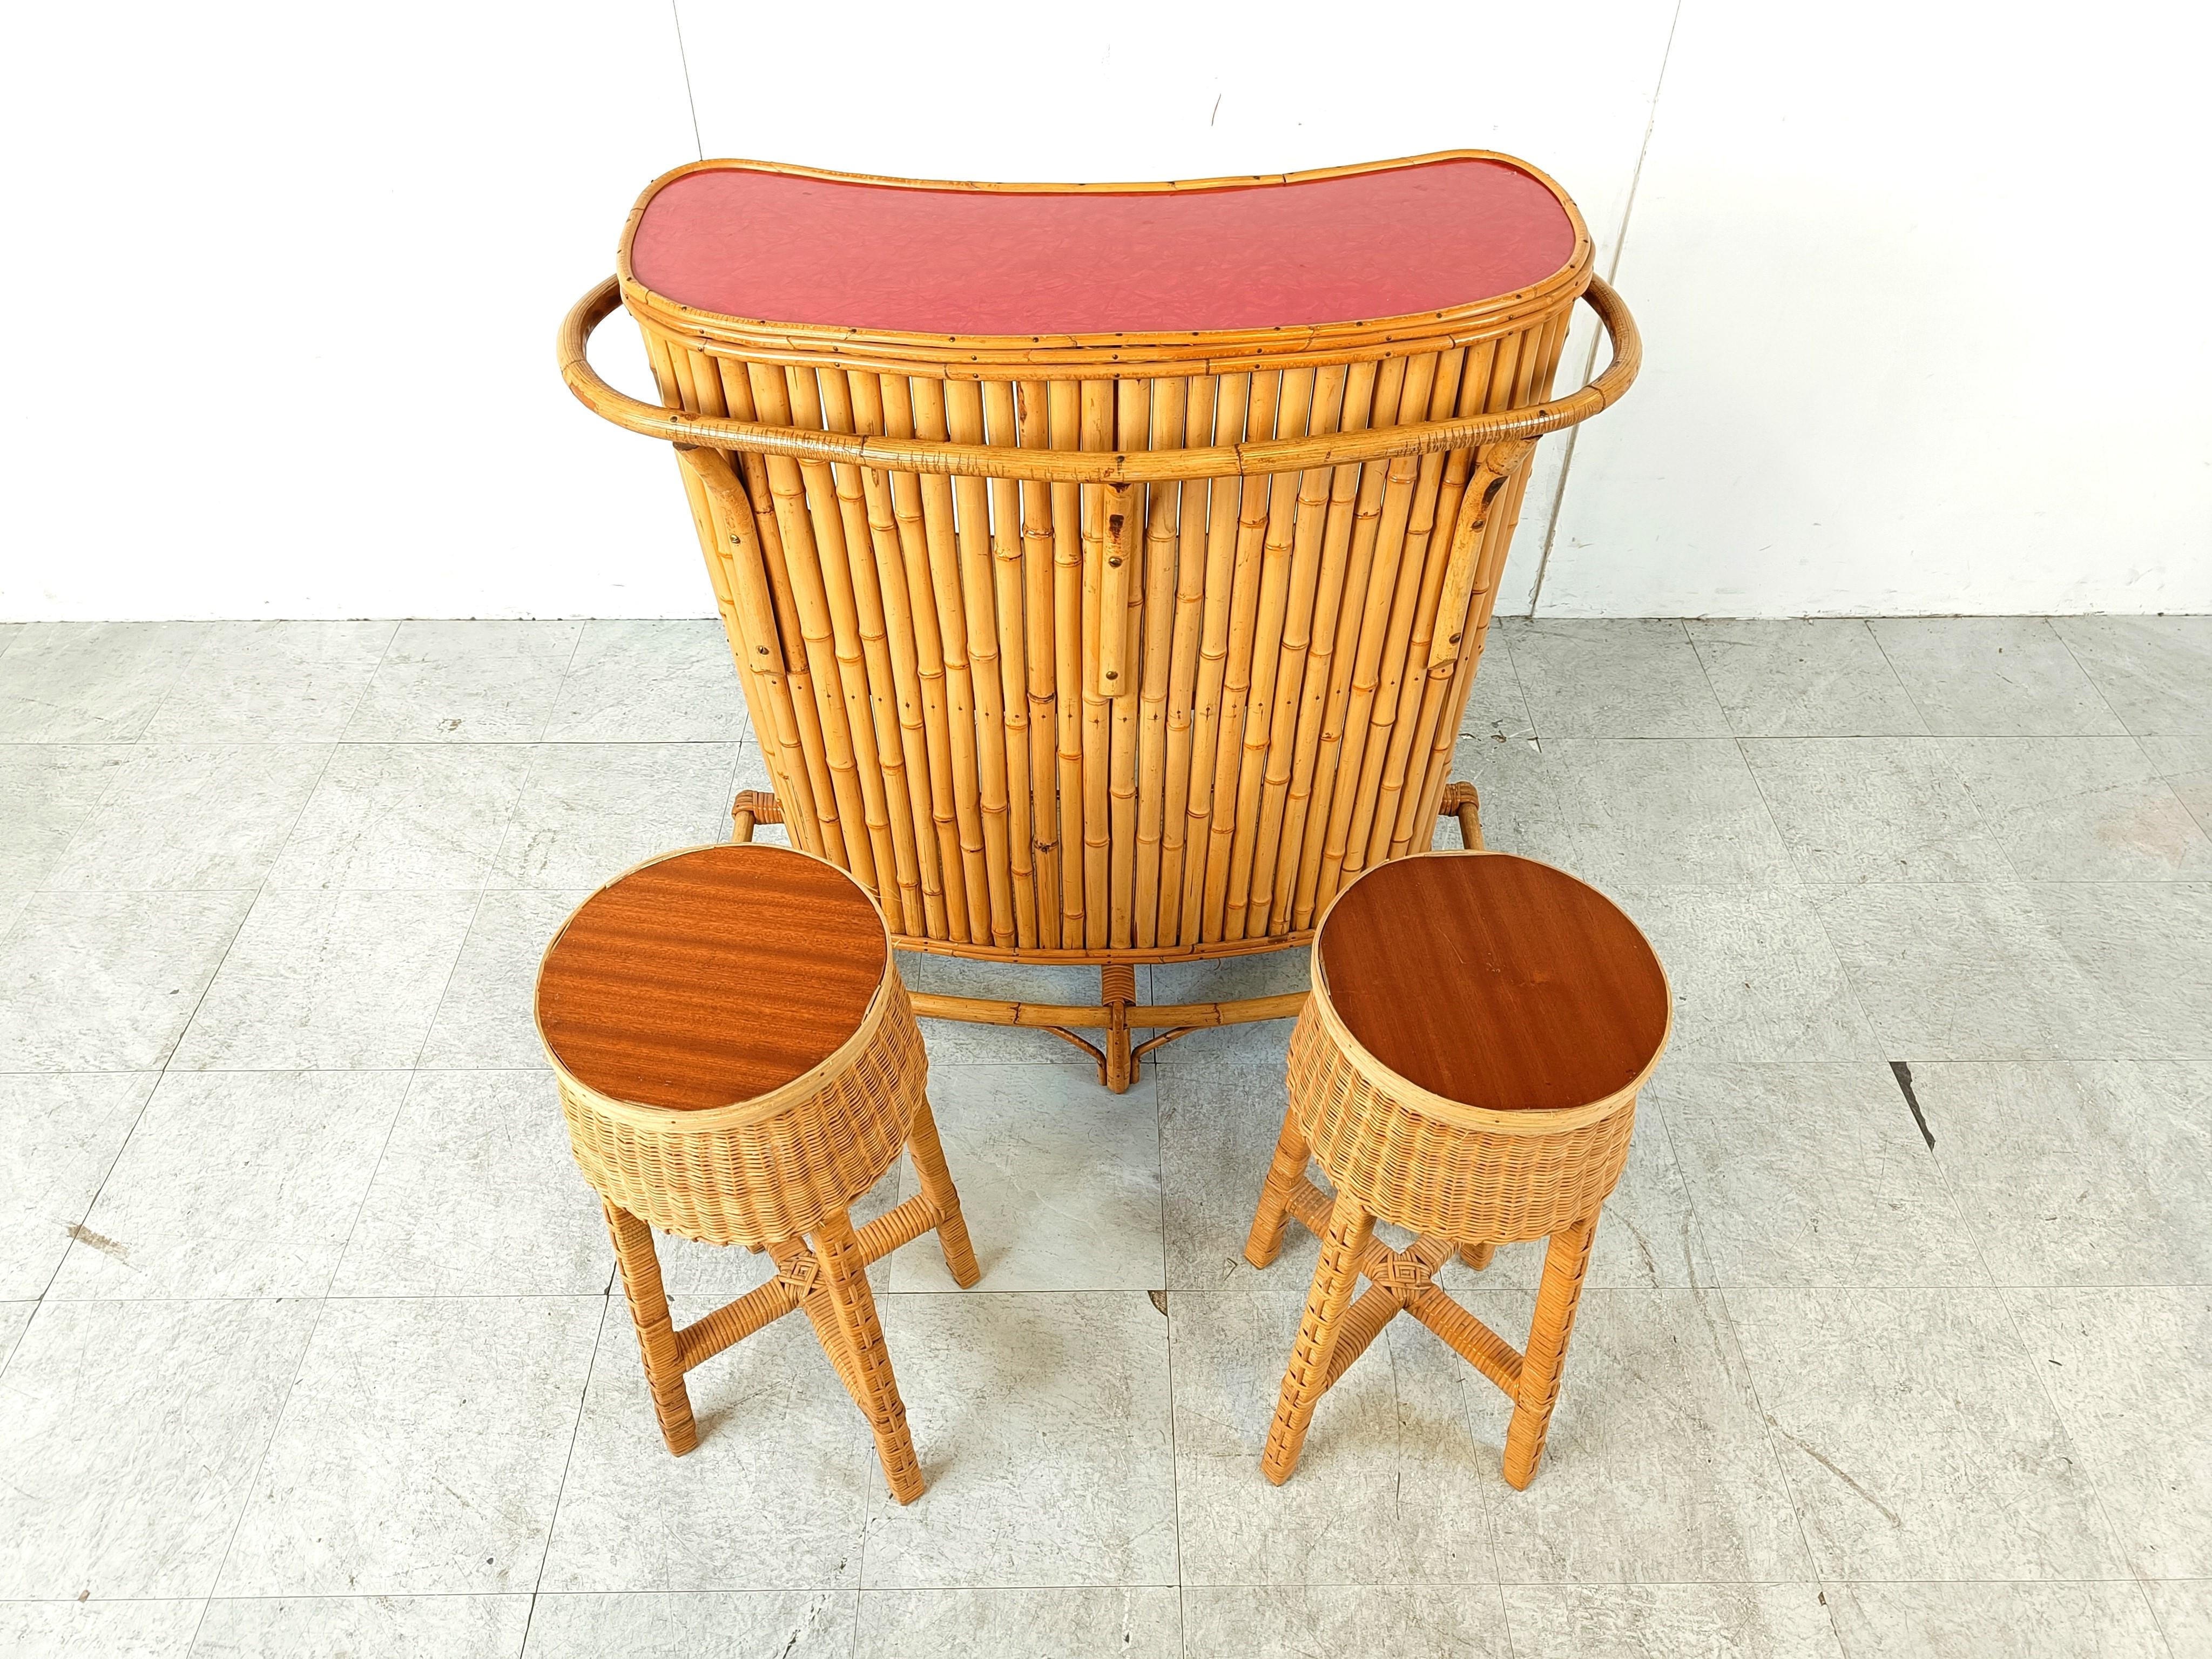 Lovely Tiki bar in bamboo for sale with a red  formica table top and two wicker stools. 

Beautiful and well made example.

Very good condition.

1960s - France

Dimensions:
Height: 97cm/38.18